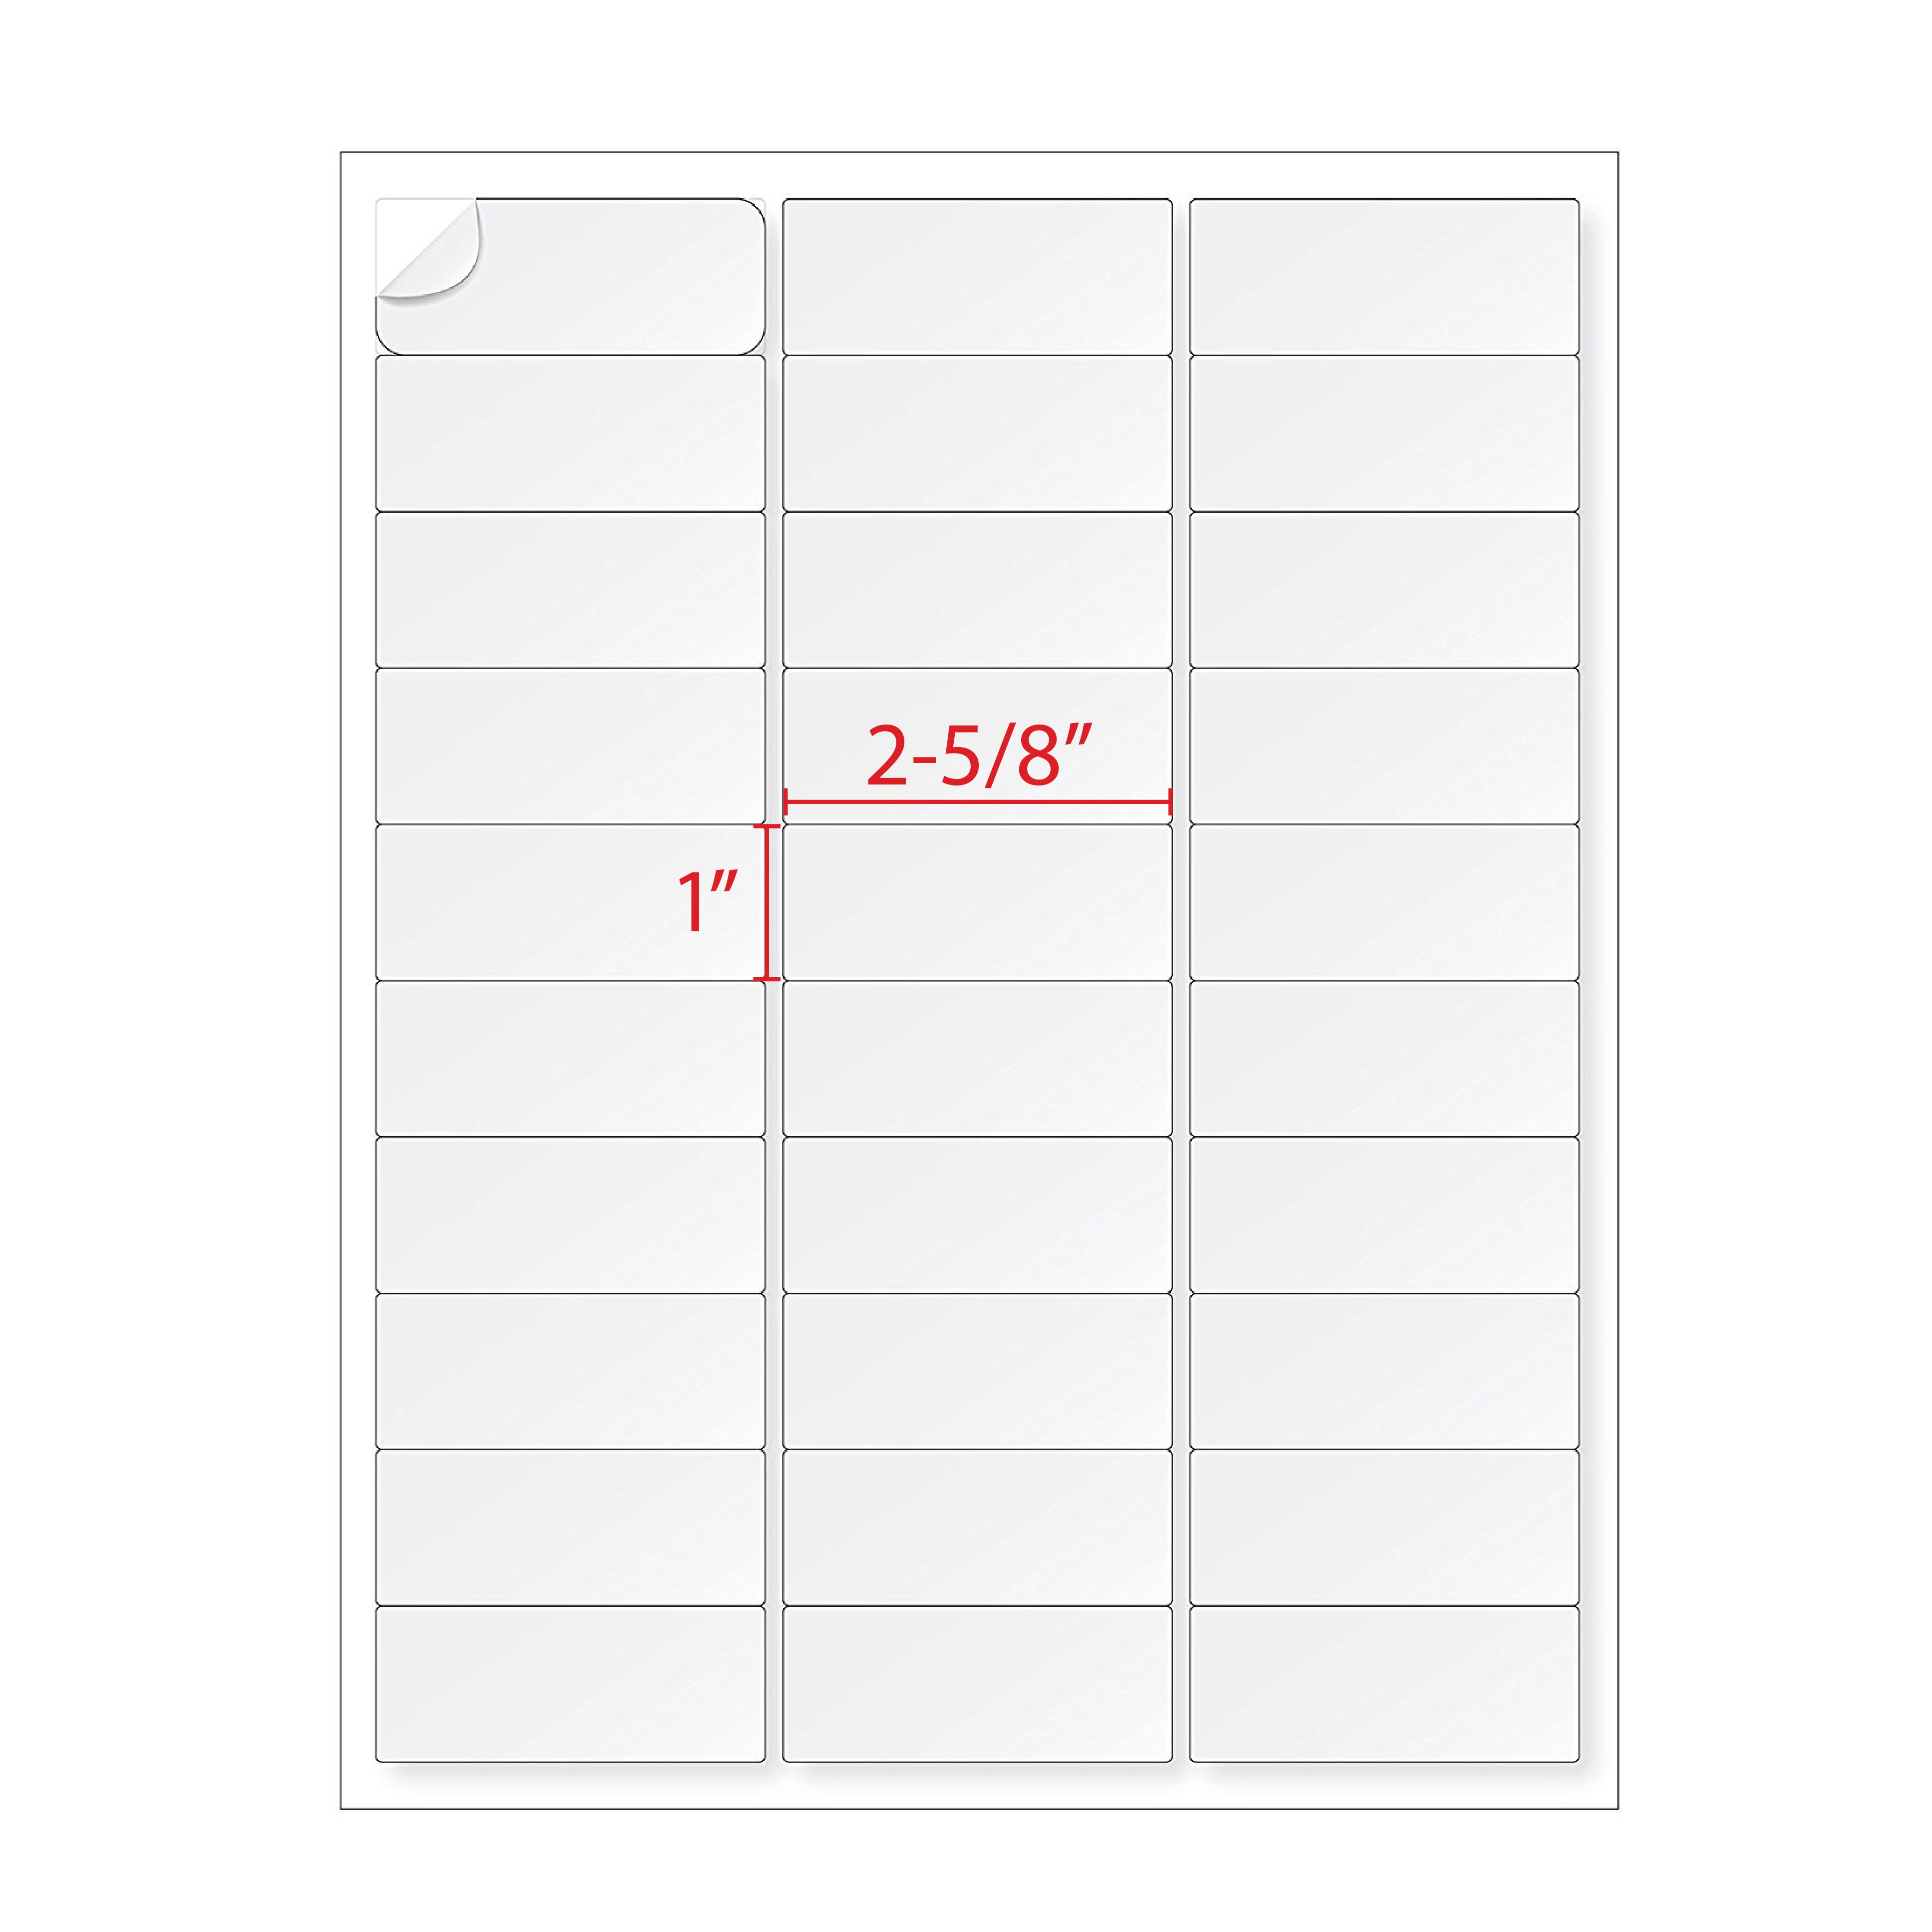 1" x 2 5/8" Blank Labels ( 30 Labels Per Sheet ) - Avery 5160 Compatible